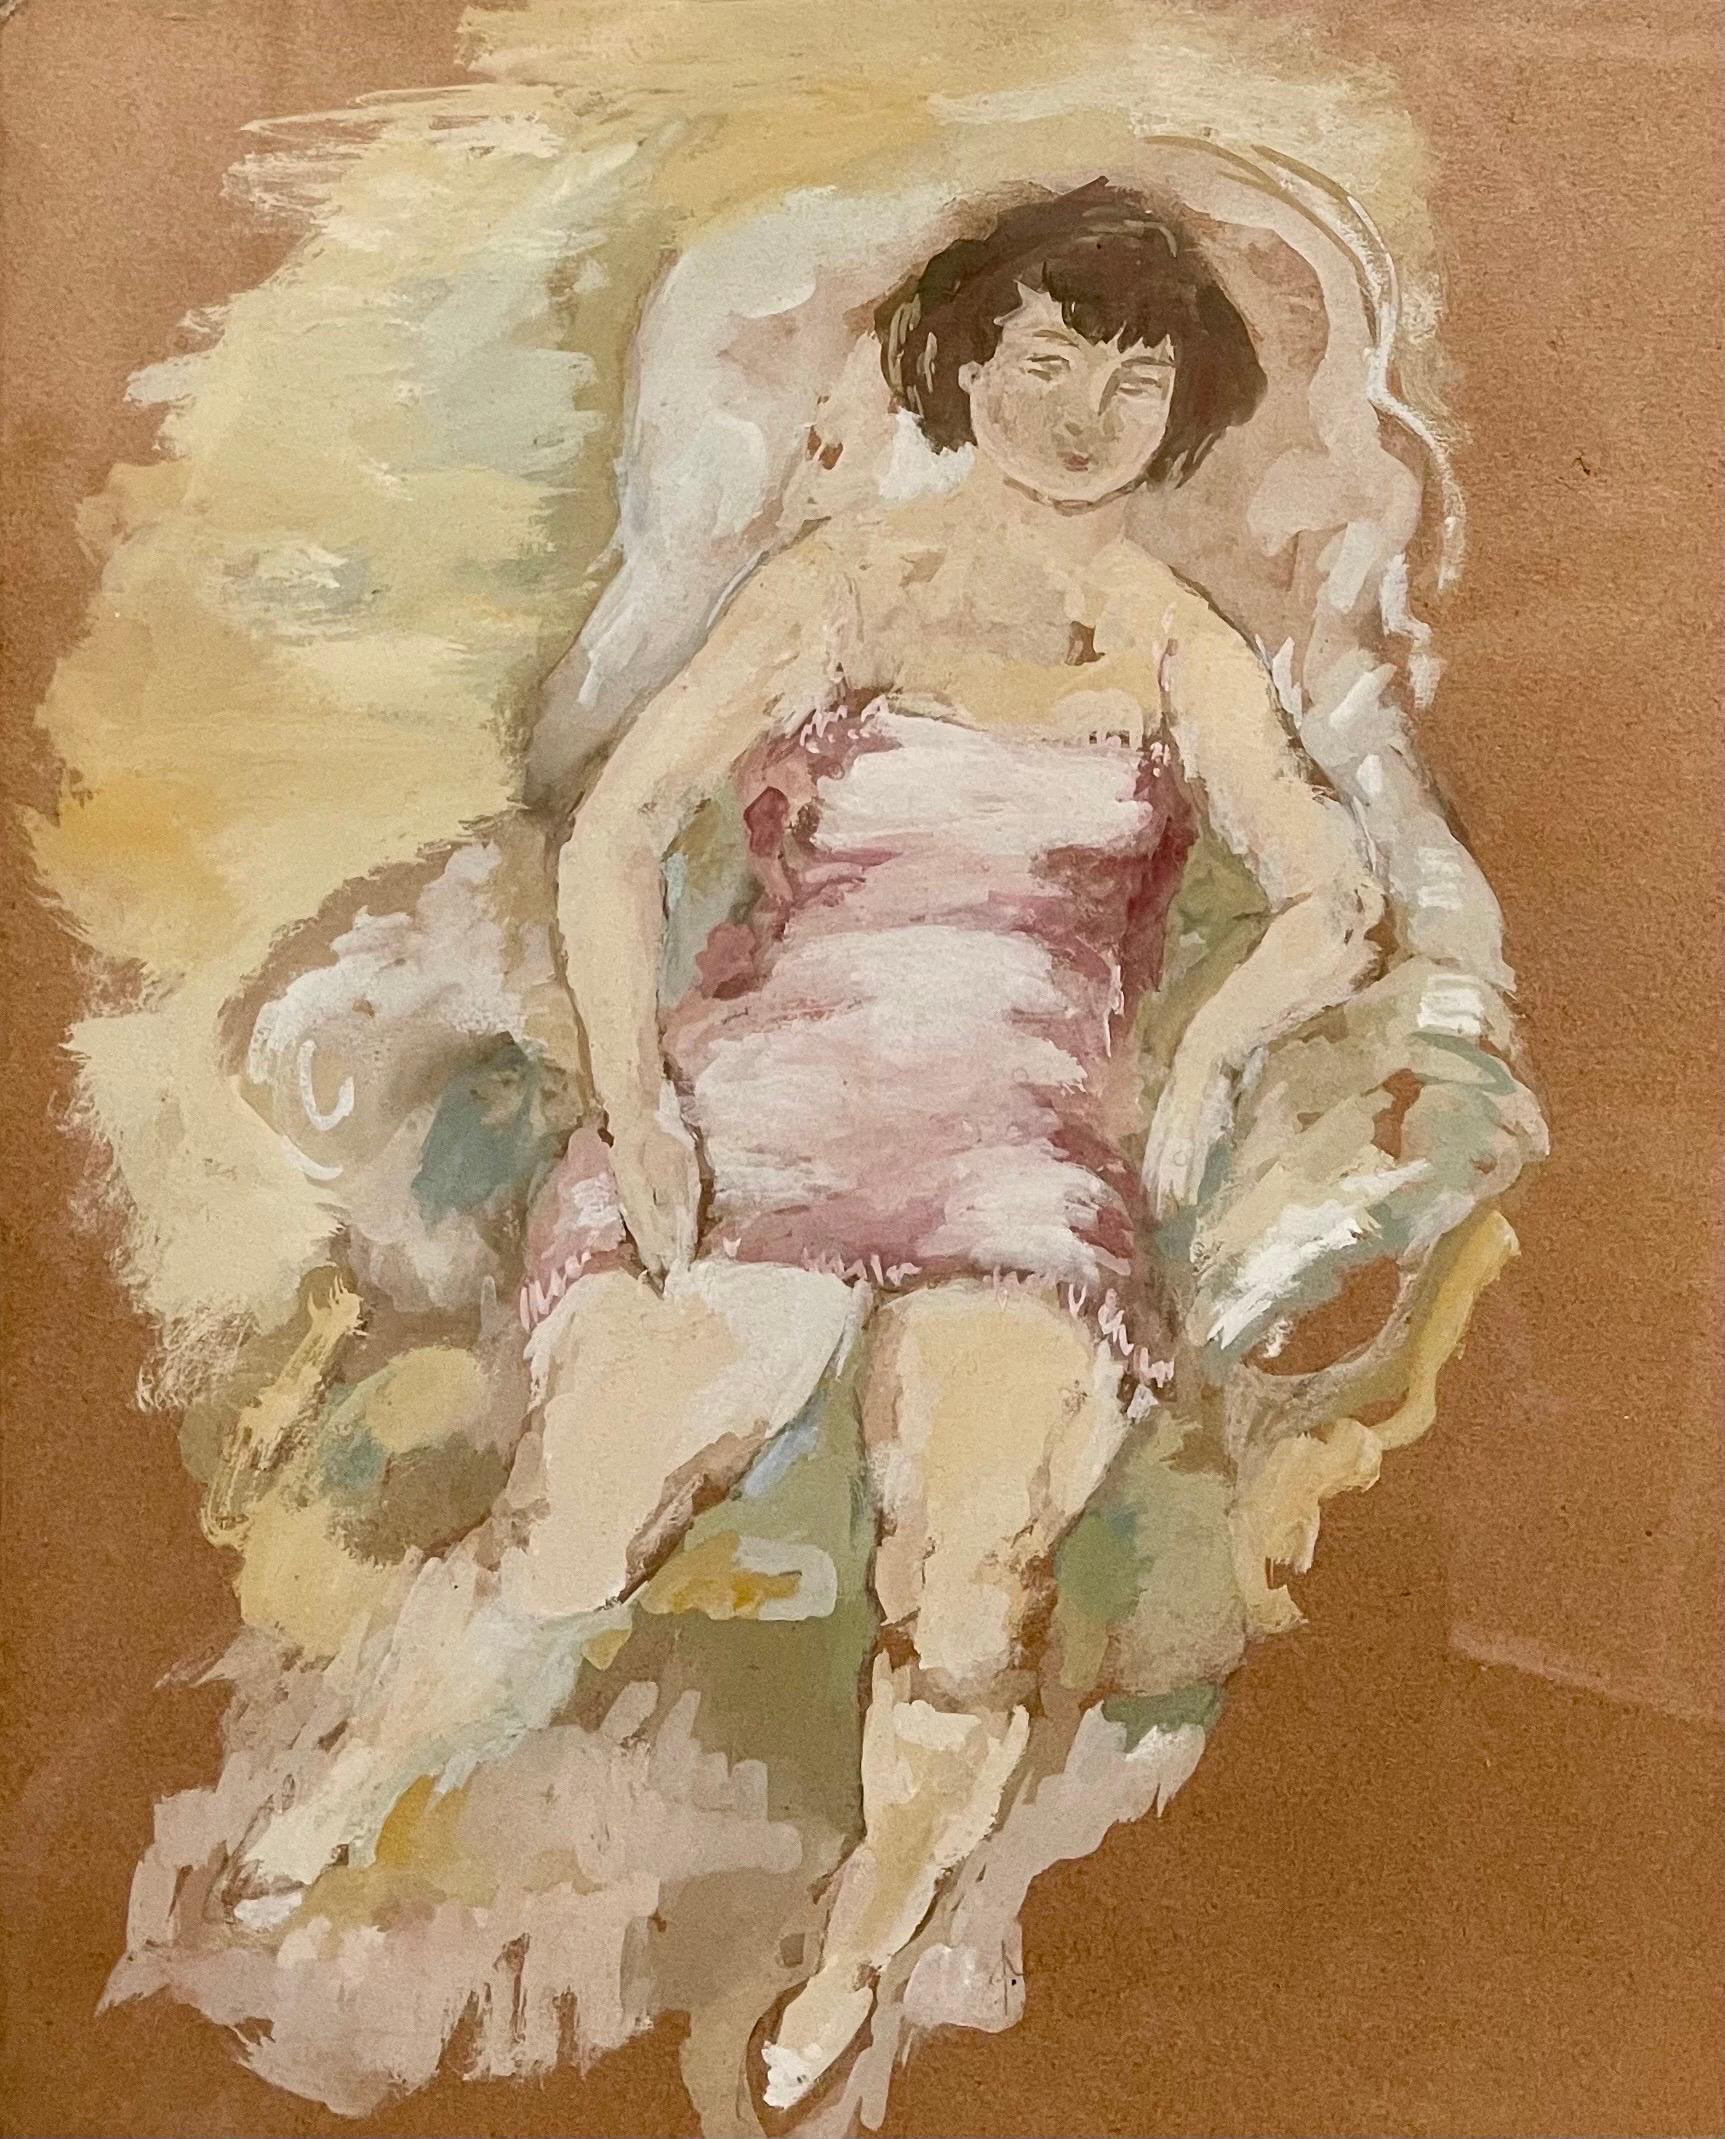 
Genre: German Expressionist
Subject: Woman
Medium: gouache paint
Surface: Paper board
This is hand signed lower right.
Framed it measures 17.25 X 15.5, sheet 12 X 10
This came from a Jewish estate. there was no additional paperwork or